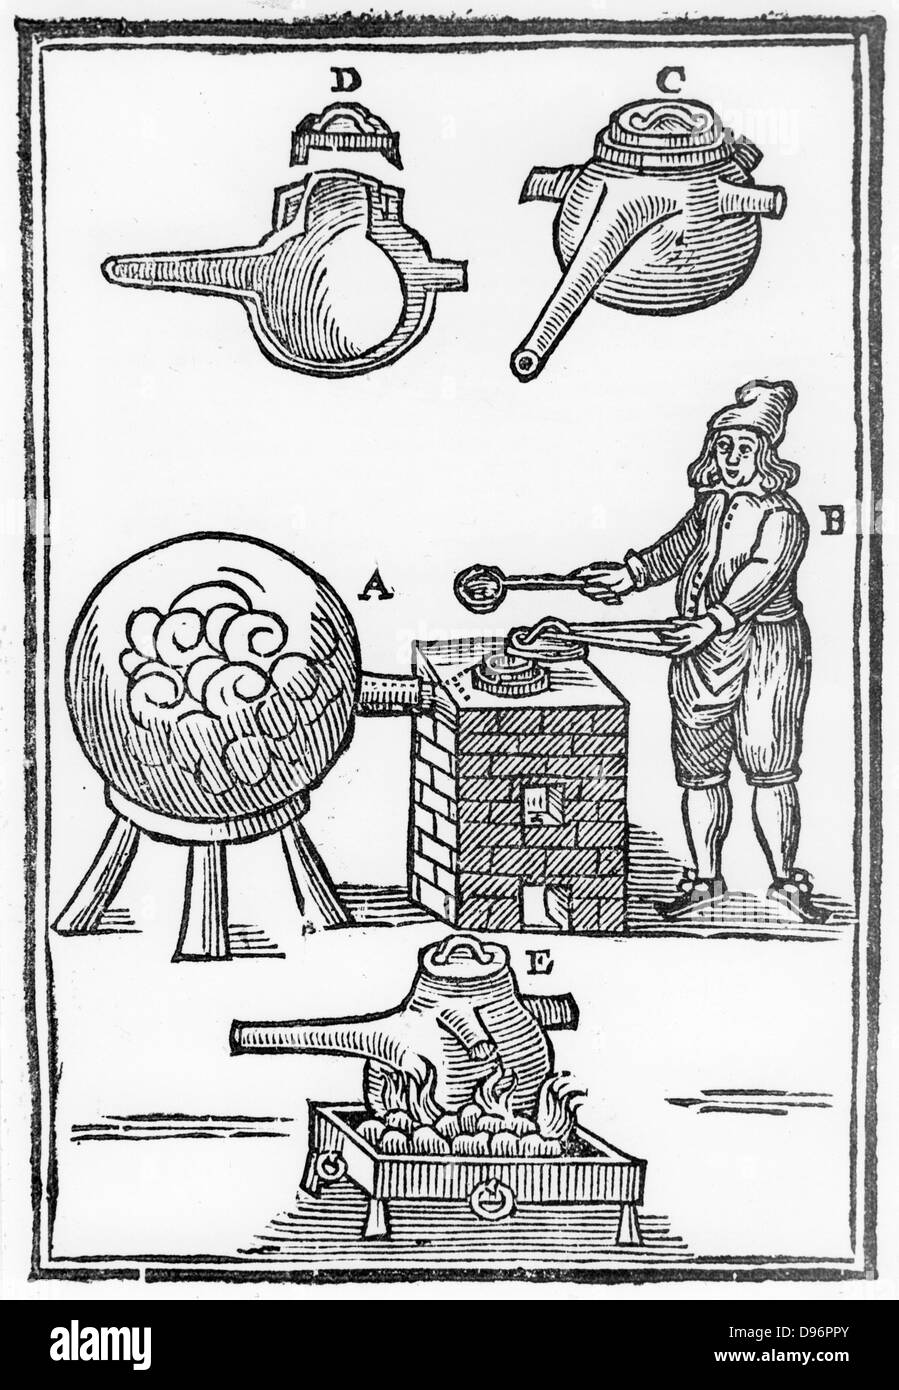 Distillation of oil of vitriol also known as sulphuric acid, 1651. Iron retort with cover, detail at C,D, is placed in furnace and connected to receiver at A. At B the operator is removing pot lid with tongs and inserting ingredients with a ladle.  This process entailed prolonged heating.  At E is a pot placed directly on the fire rather than in furnace. From 'A Description of New Philosophical Furnaces', by Johann Rudolph Glauber. (London 1651). First English edition, translated by John French. Woodcut. Stock Photo